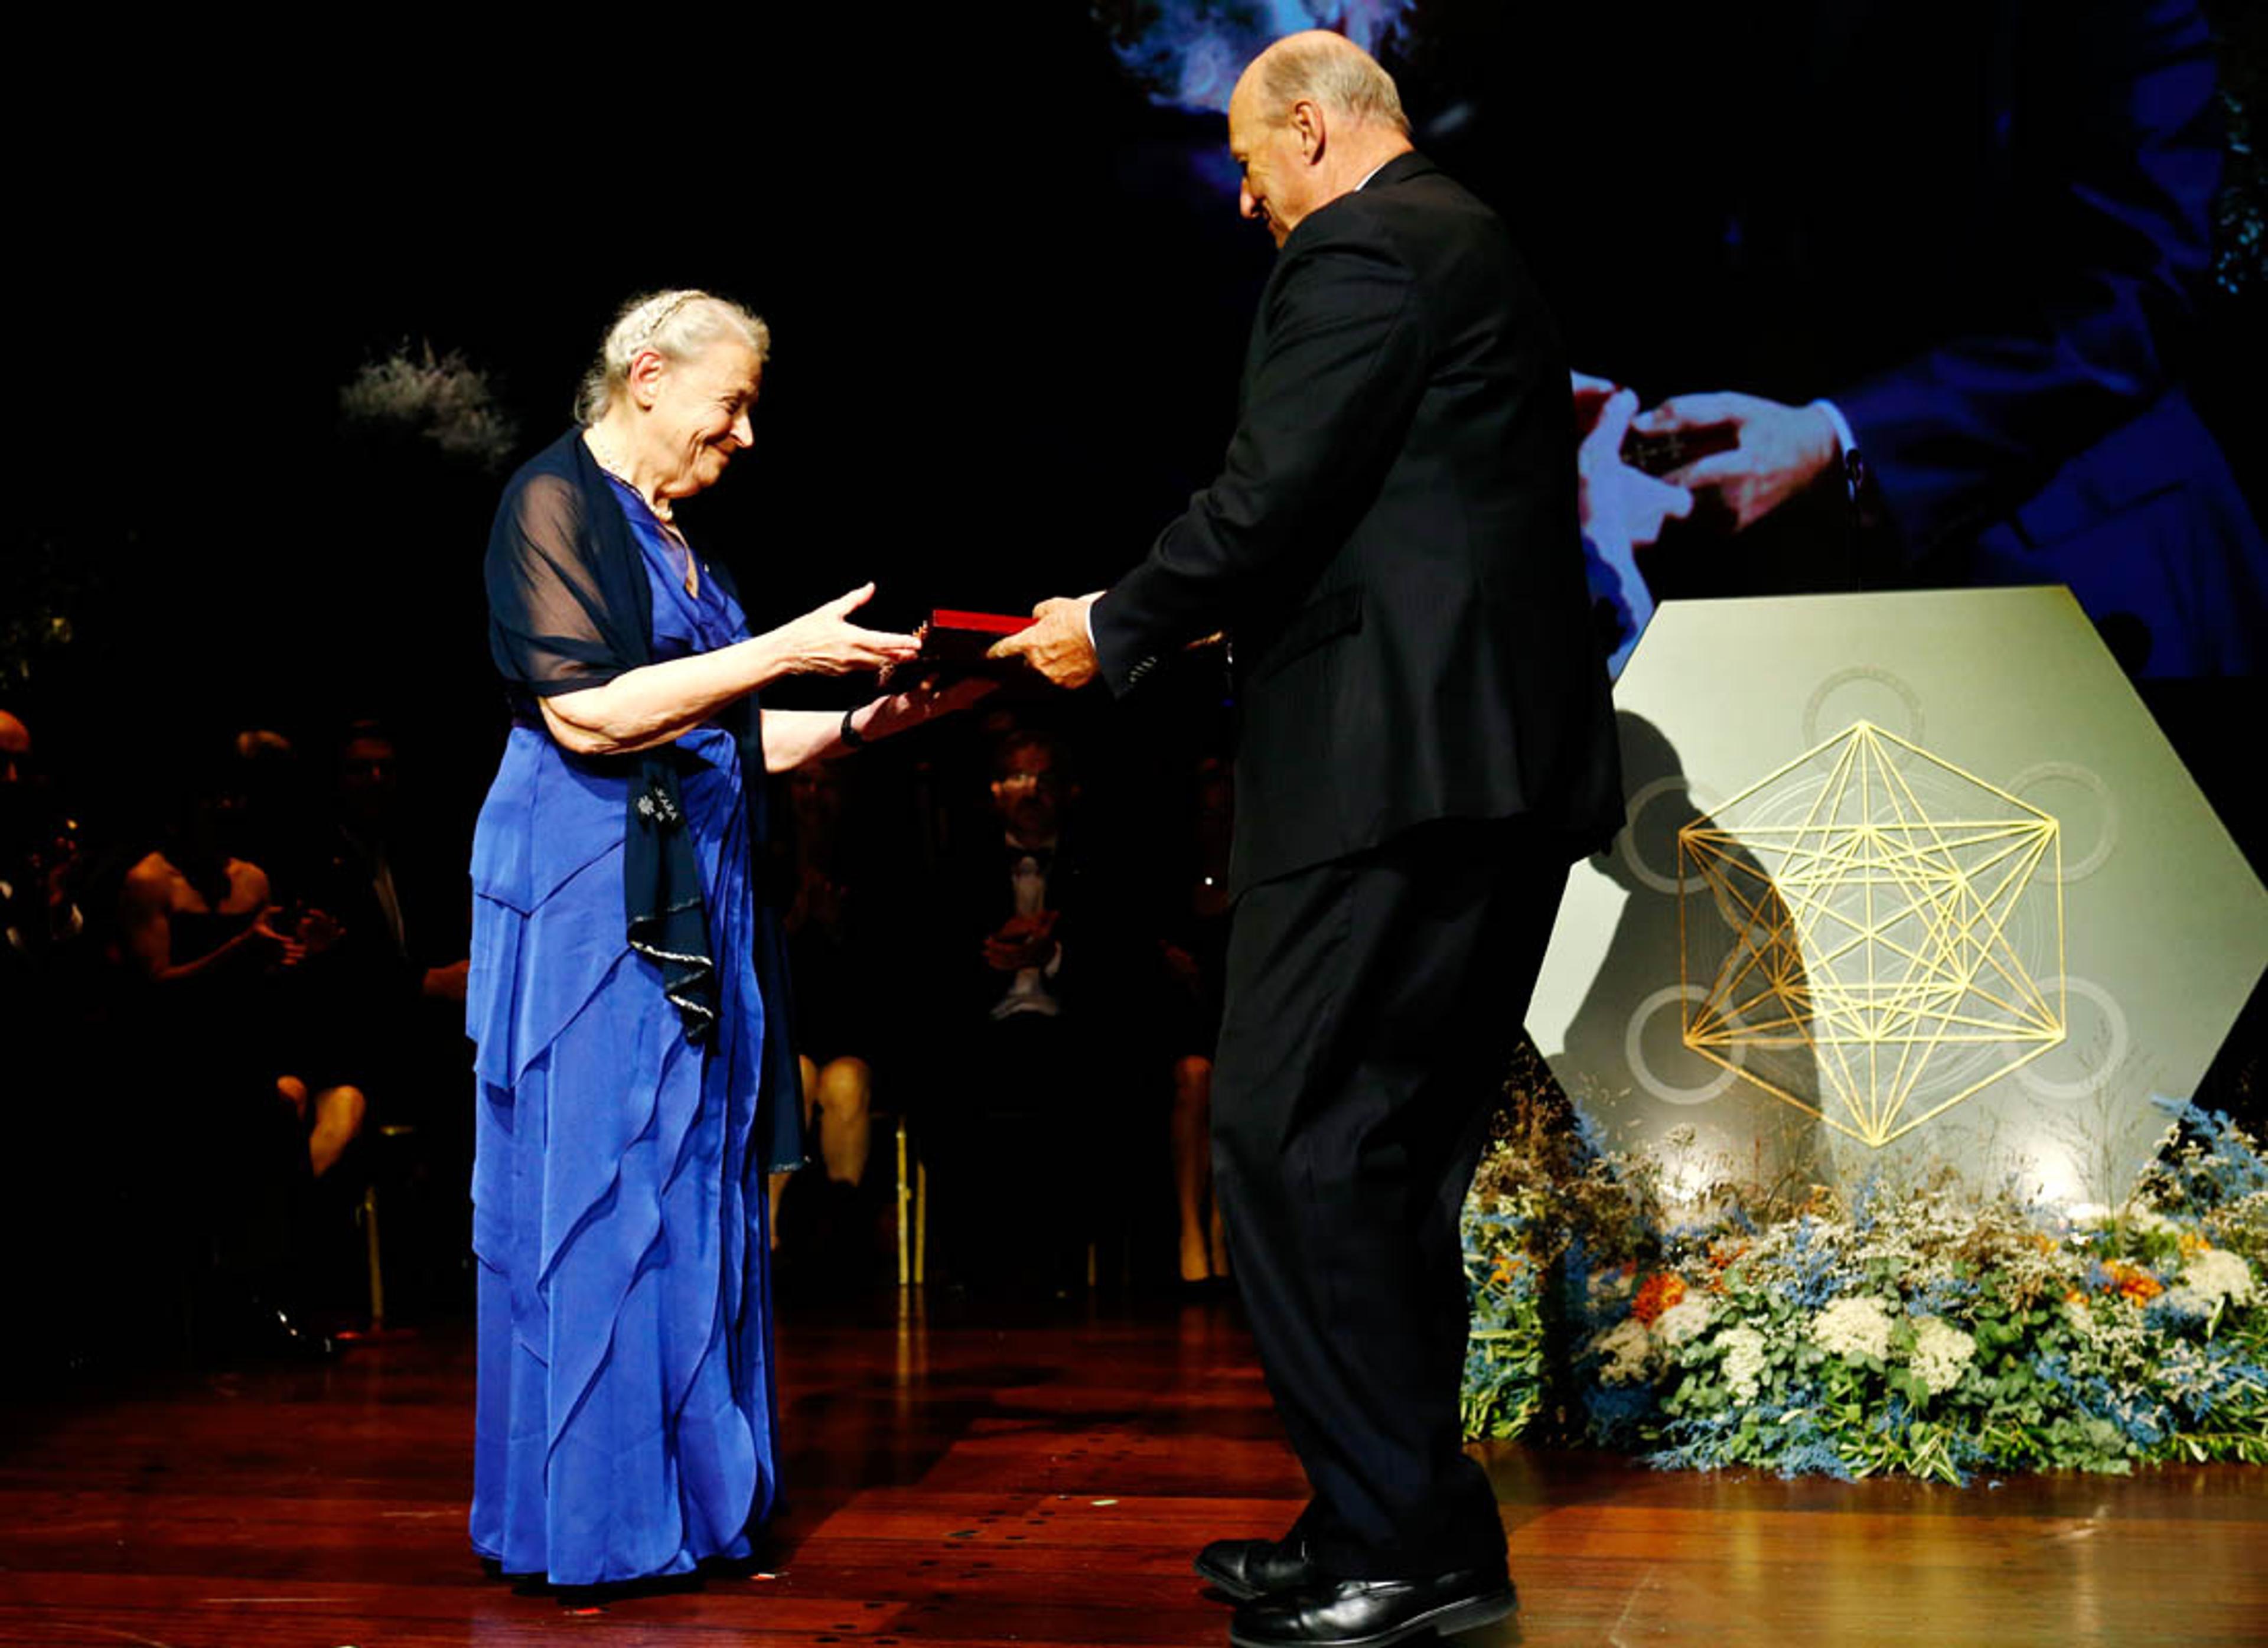 Mildred S. Dresselhaus receives the Kavli Prize from His Royal Highness King Harald at the Oslo Concert Hall